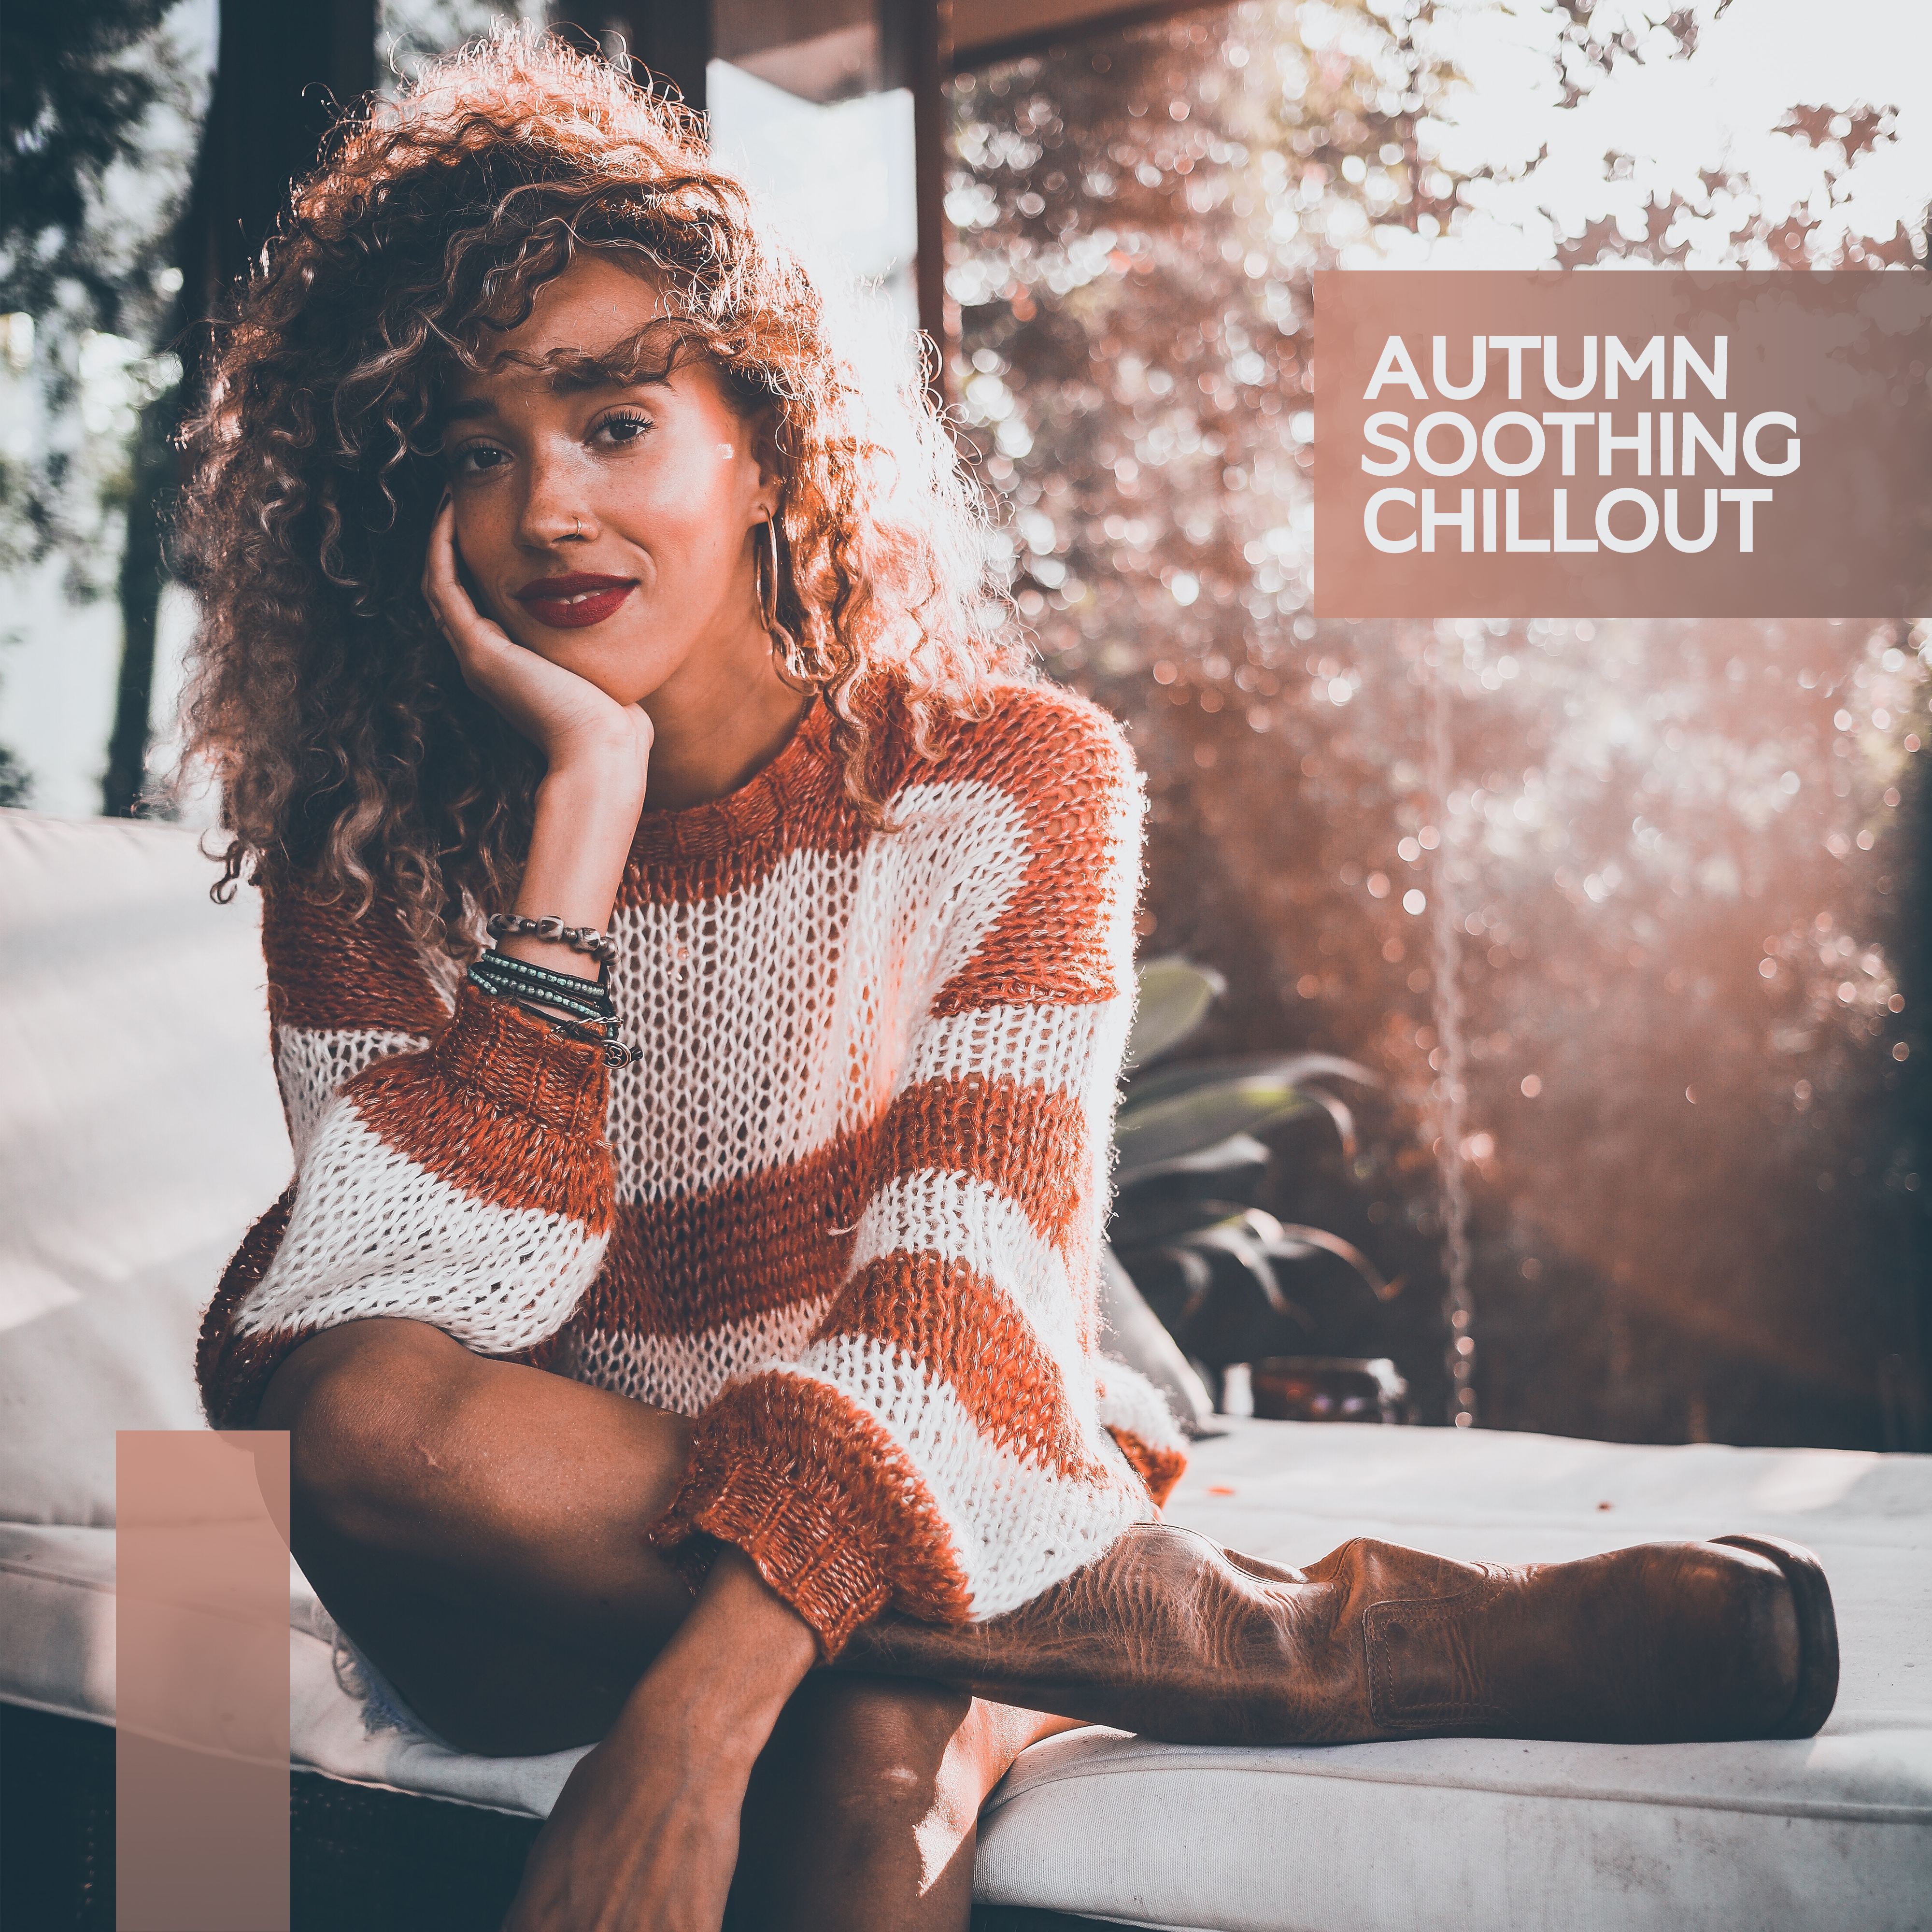 Autumn Soothing Chillout